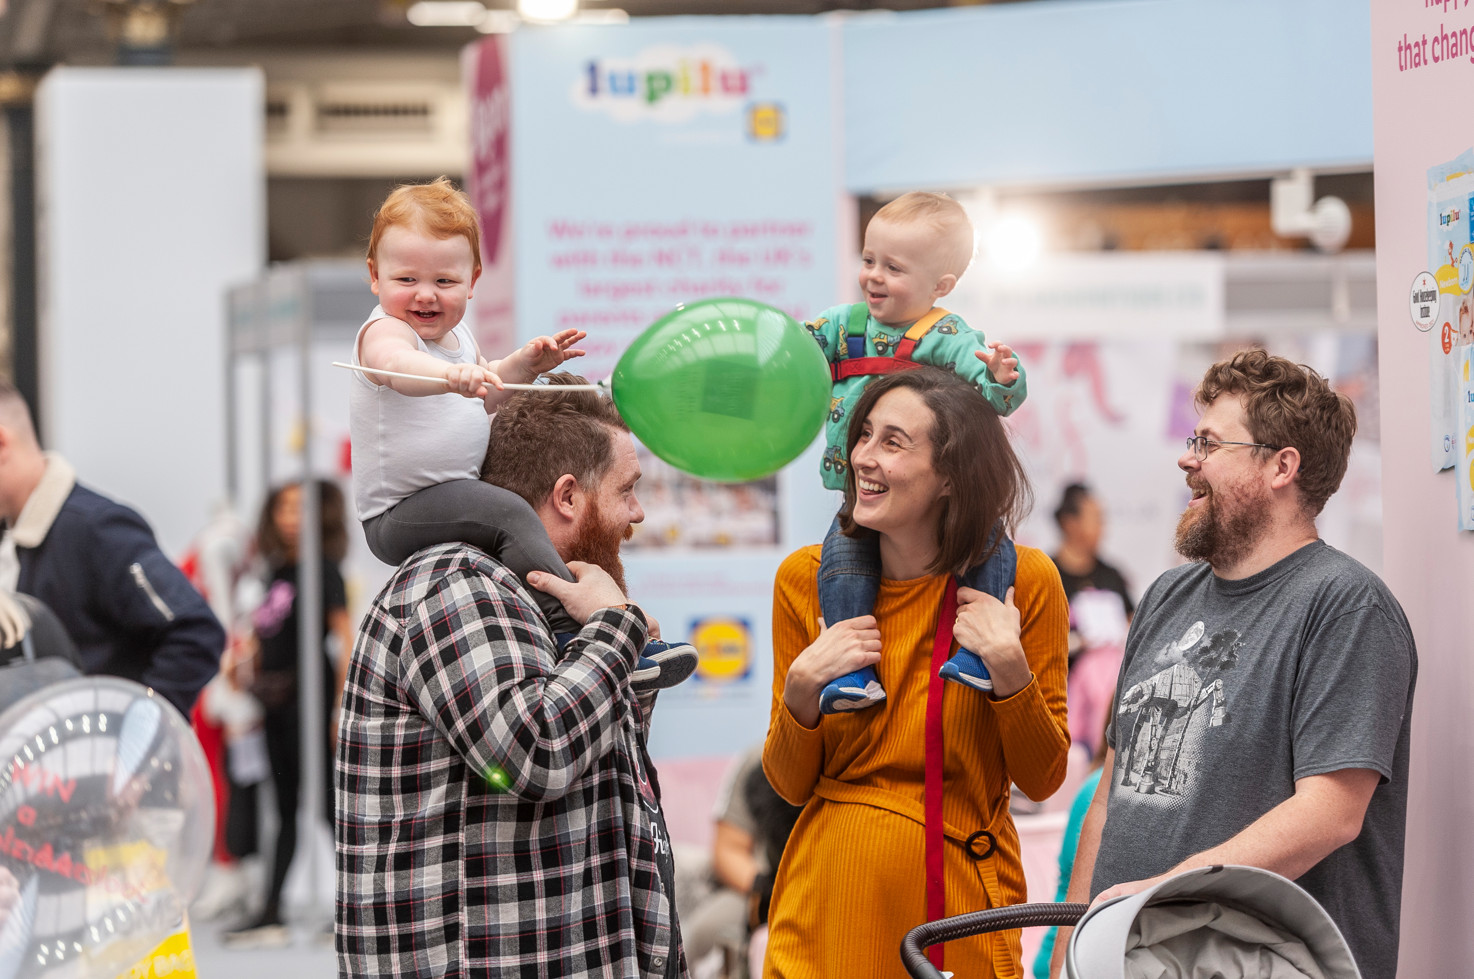 Celebrations begin as the baby show turns 21 at olympia london this autumn (1)